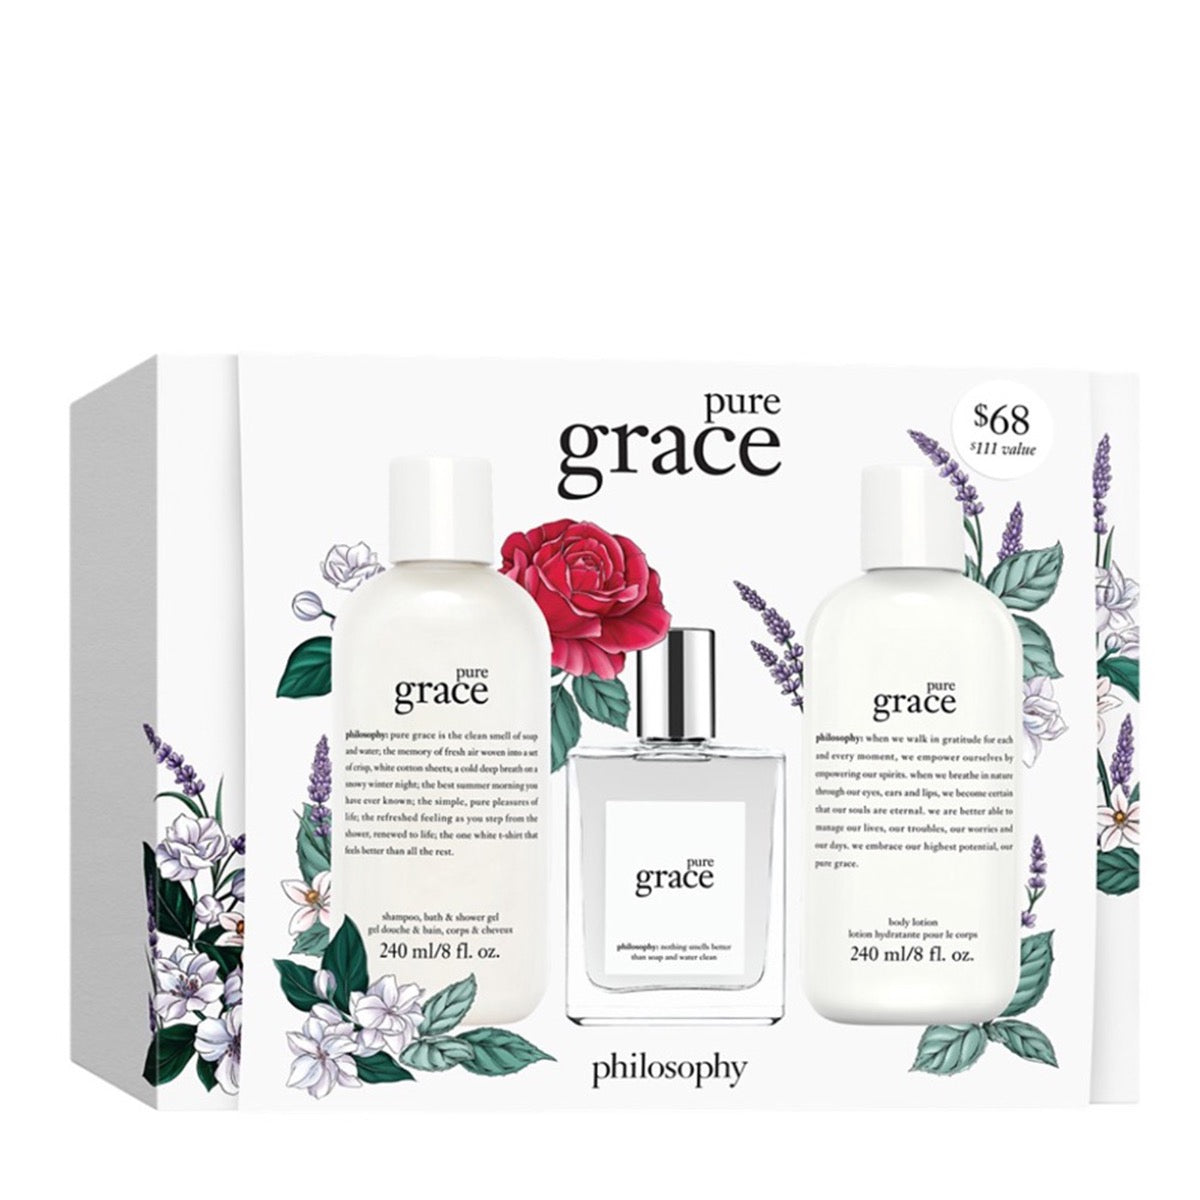 Philosophy Pure Grace Body Lotion 8 fl oz / 240 ml Ingredients and